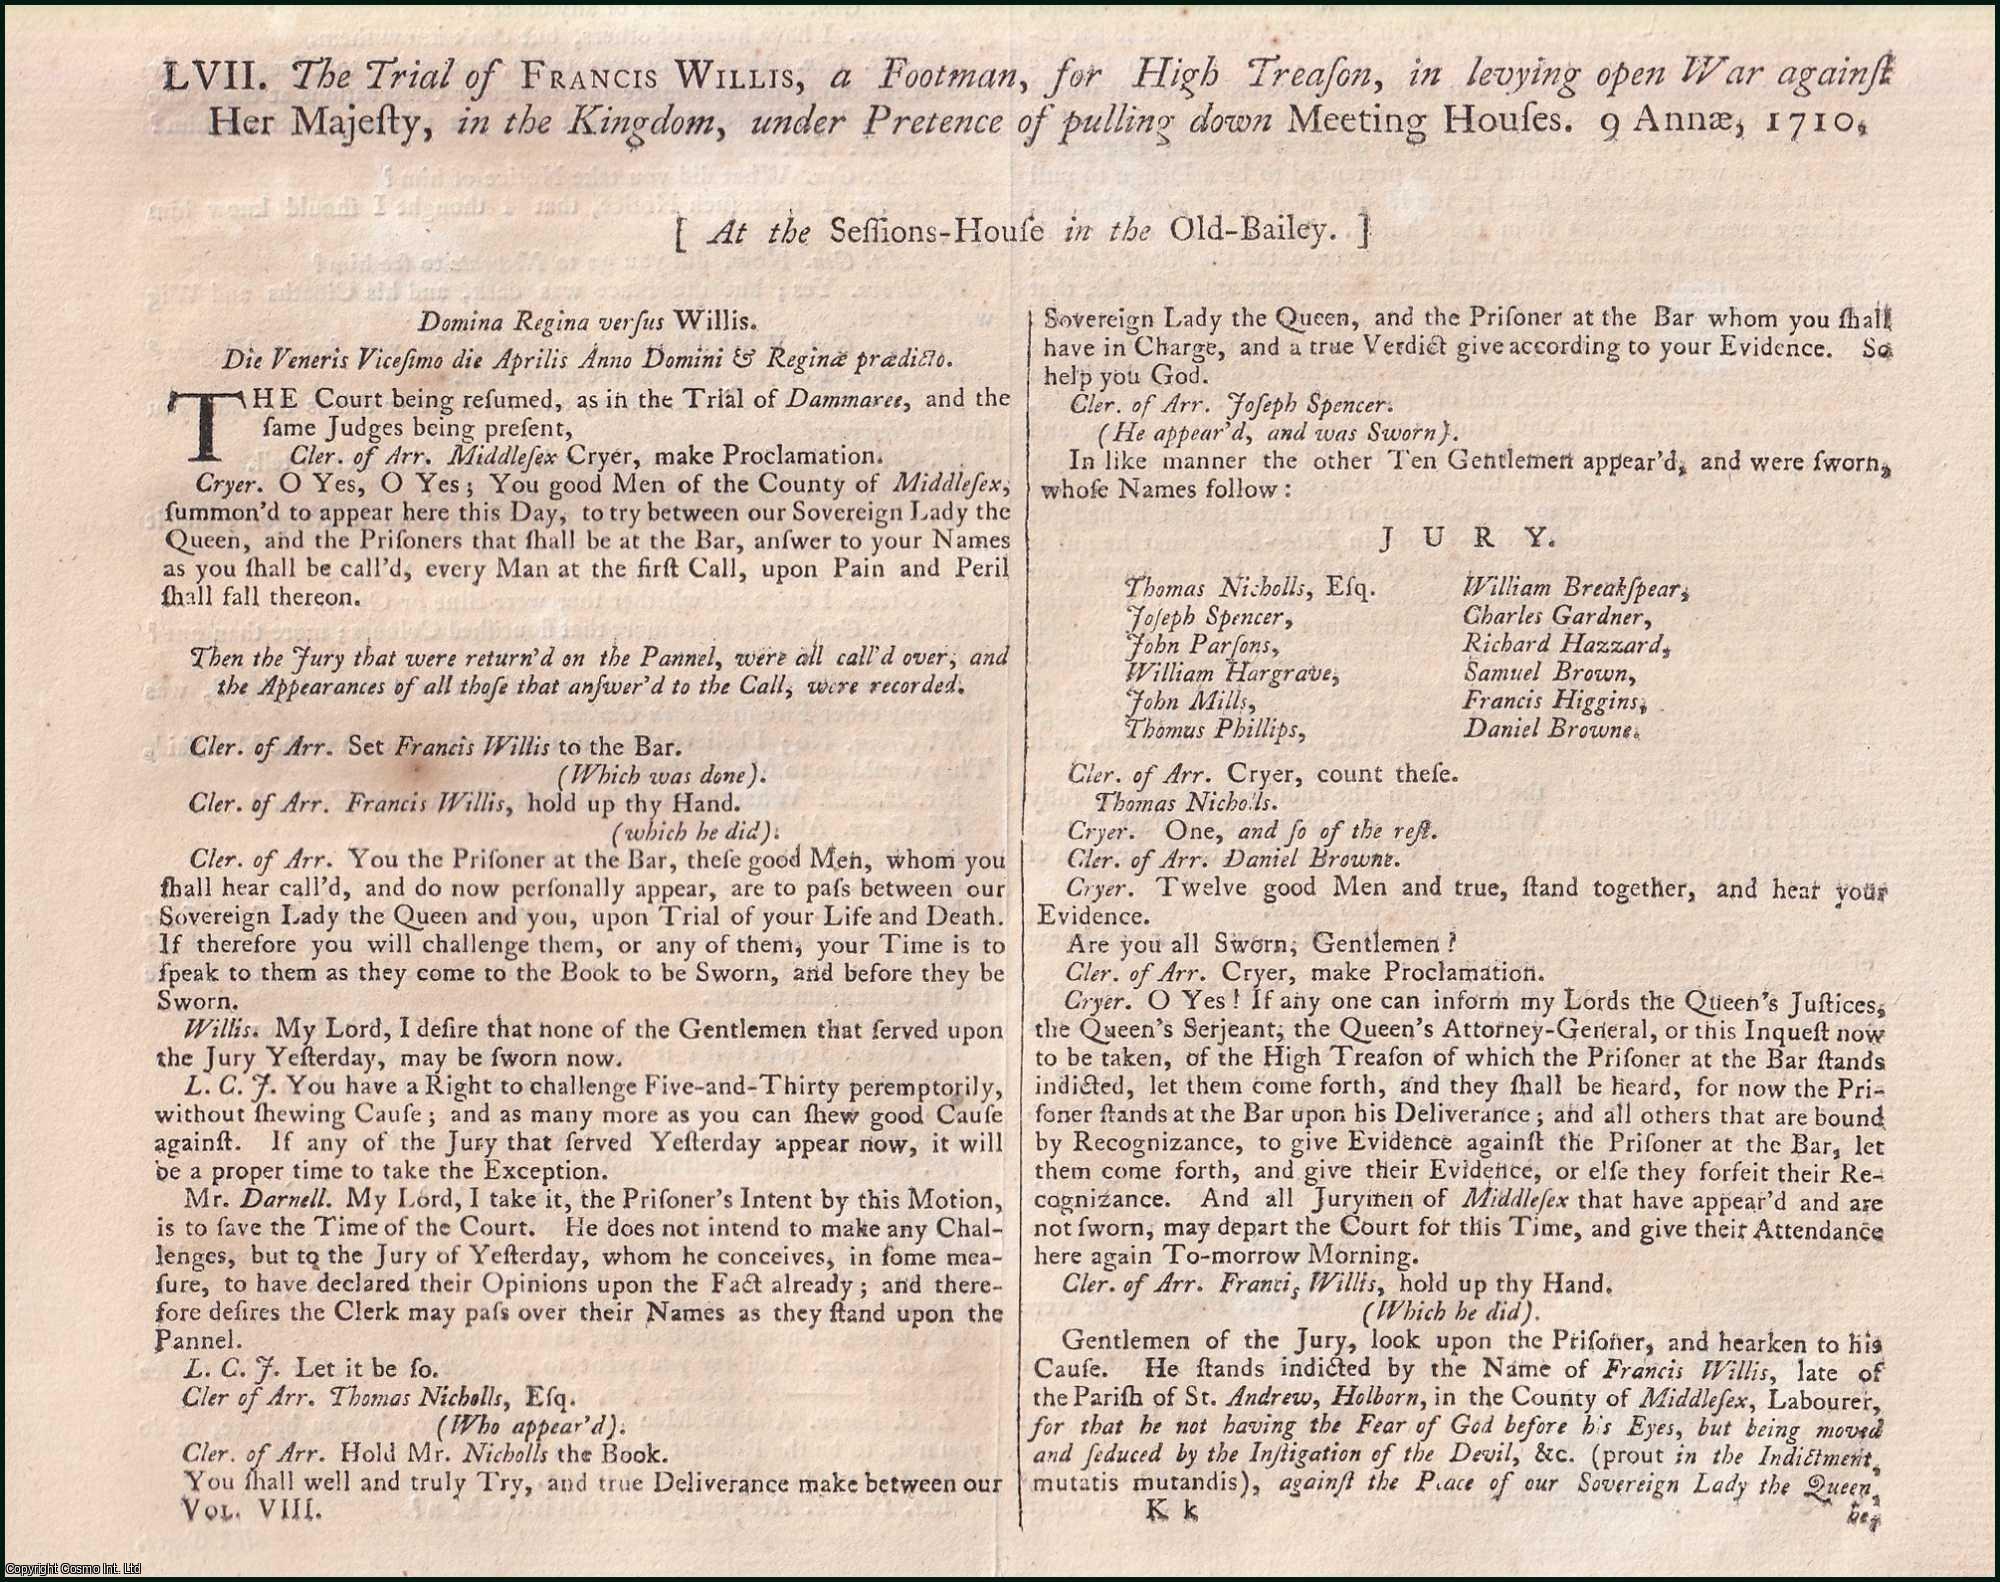 [Trial]. - The Trial of Francis Willis, a Footman, for High Treason, in levying open War against Her Majesty, in the Kingdom, under Pretence of pulling down Meeting Houses, 1710. An original report from the Collected State Trials.